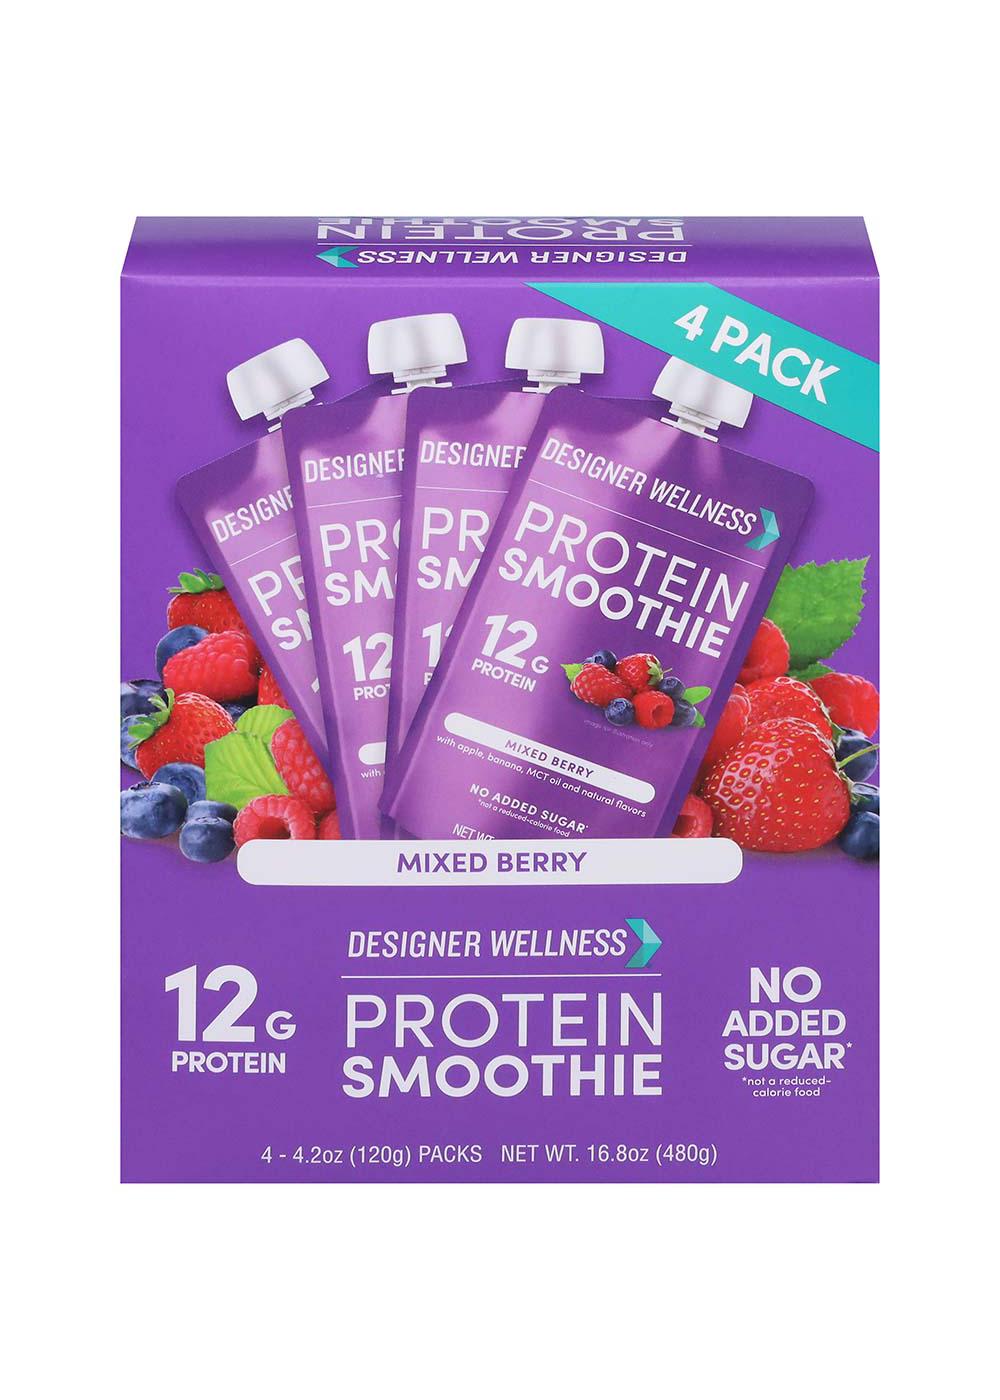 Designer Wellness Protein Smoothie - Mixed Berry; image 1 of 2